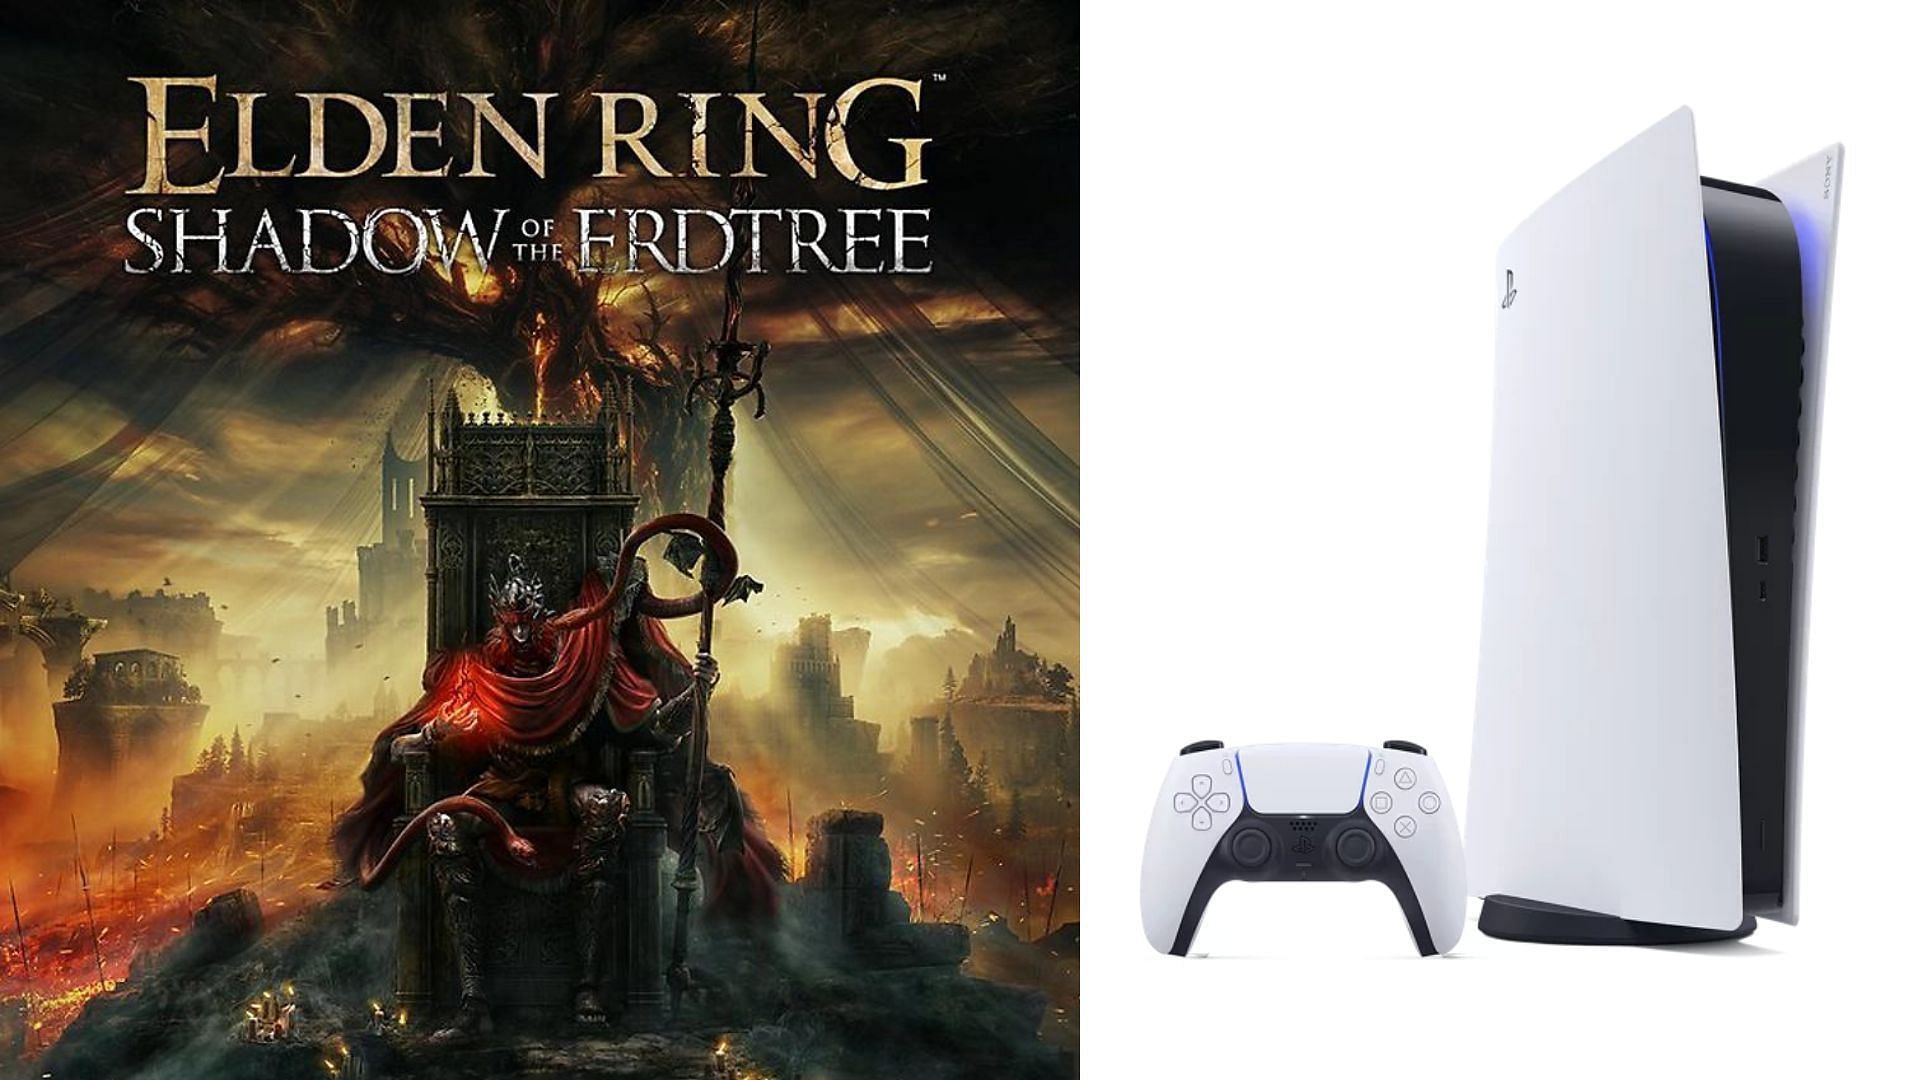 The best PS5 settings for Elden Ring DLC Shadow of Erdtree (Image via PlayStation)